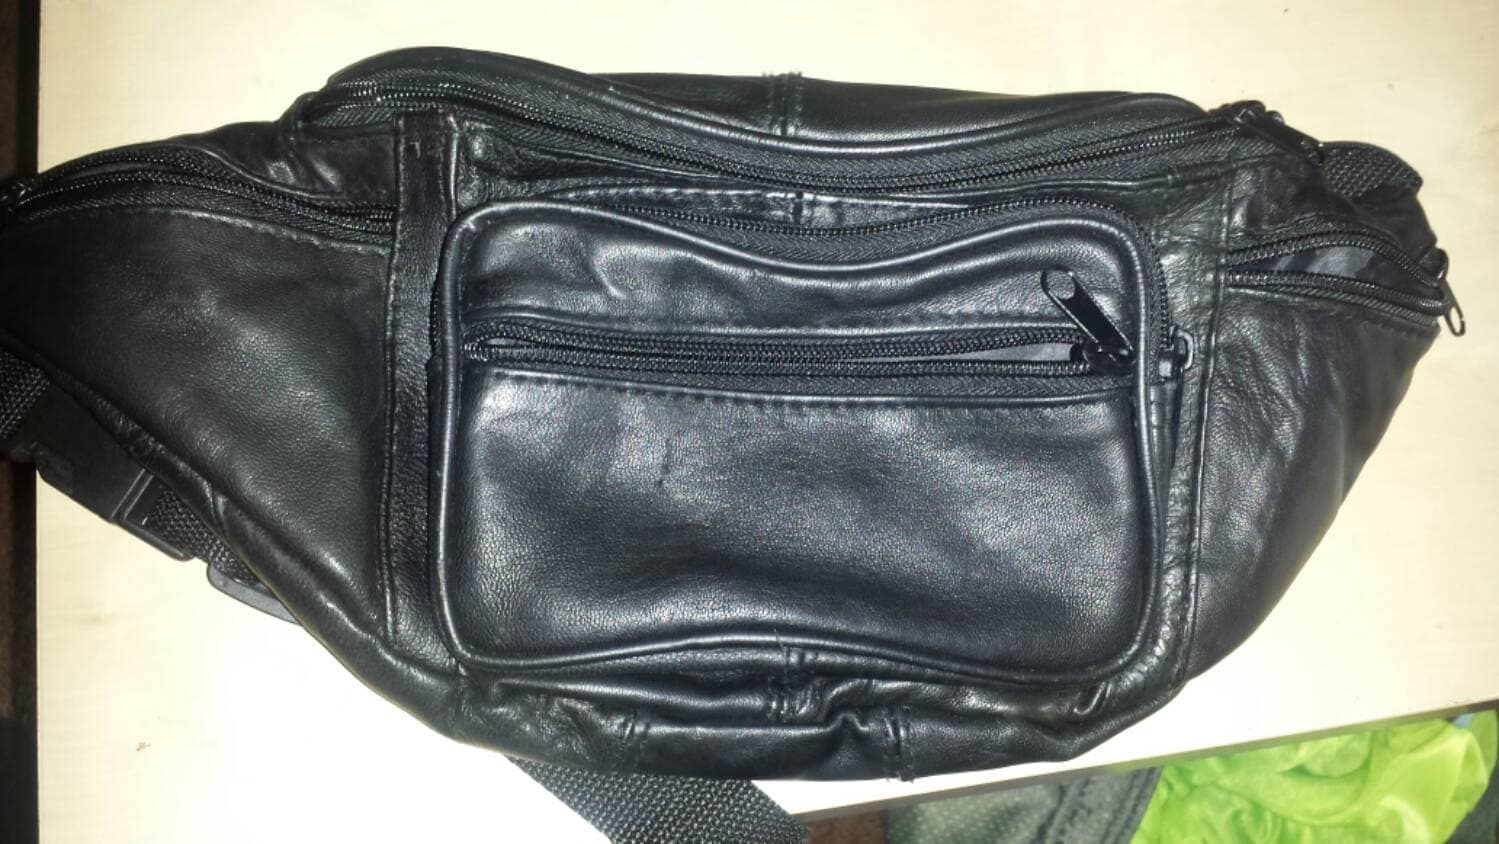 Vintage 1980s Black Leather fanny pack / OSFM by ReminisceVintage